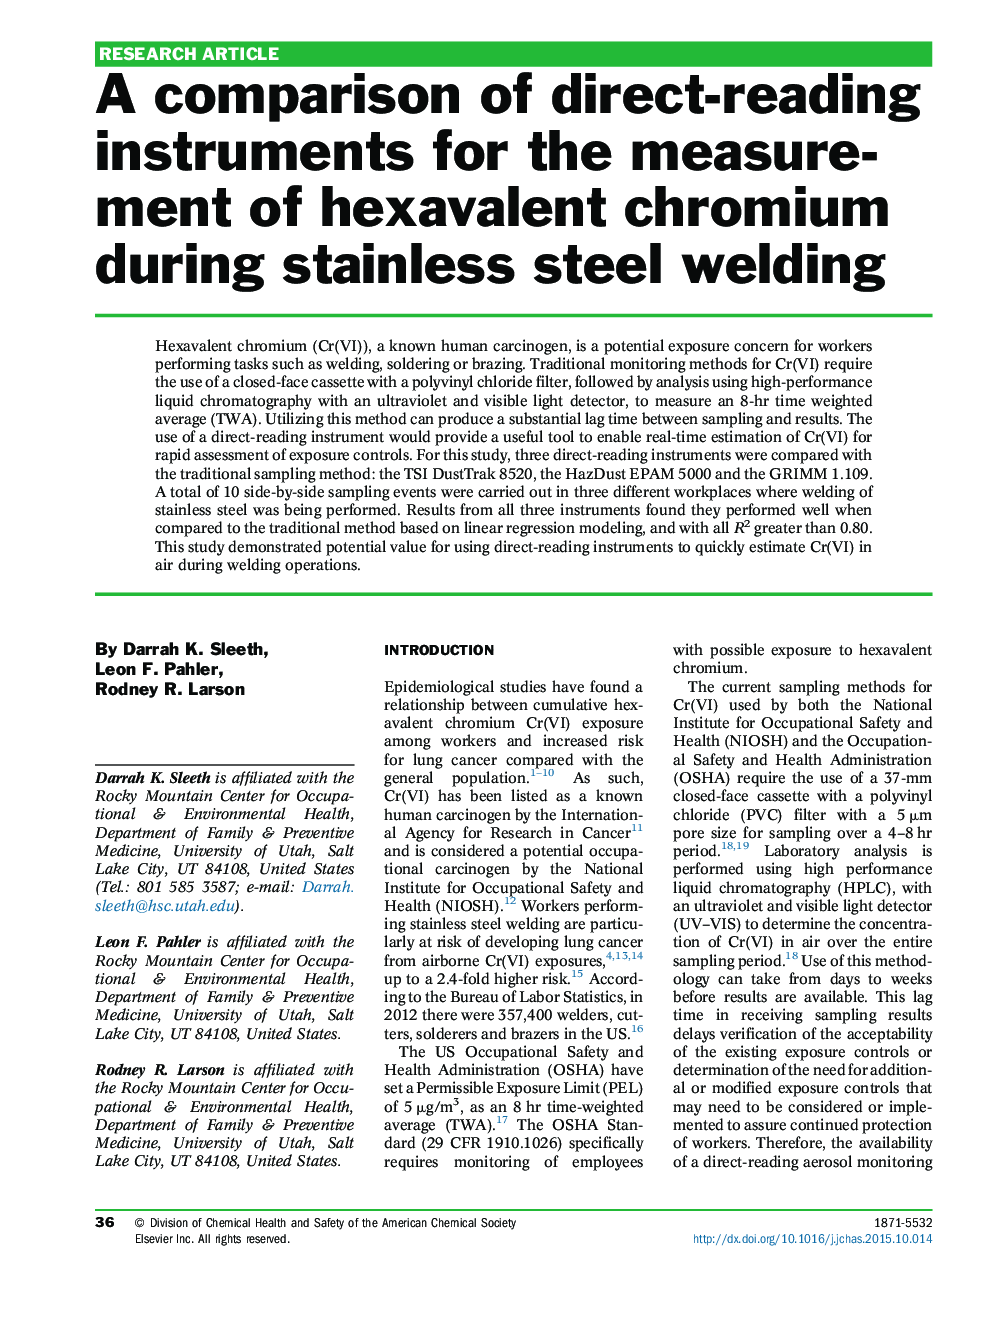 A comparison of direct-reading instruments for the measurement of hexavalent chromium during stainless steel welding